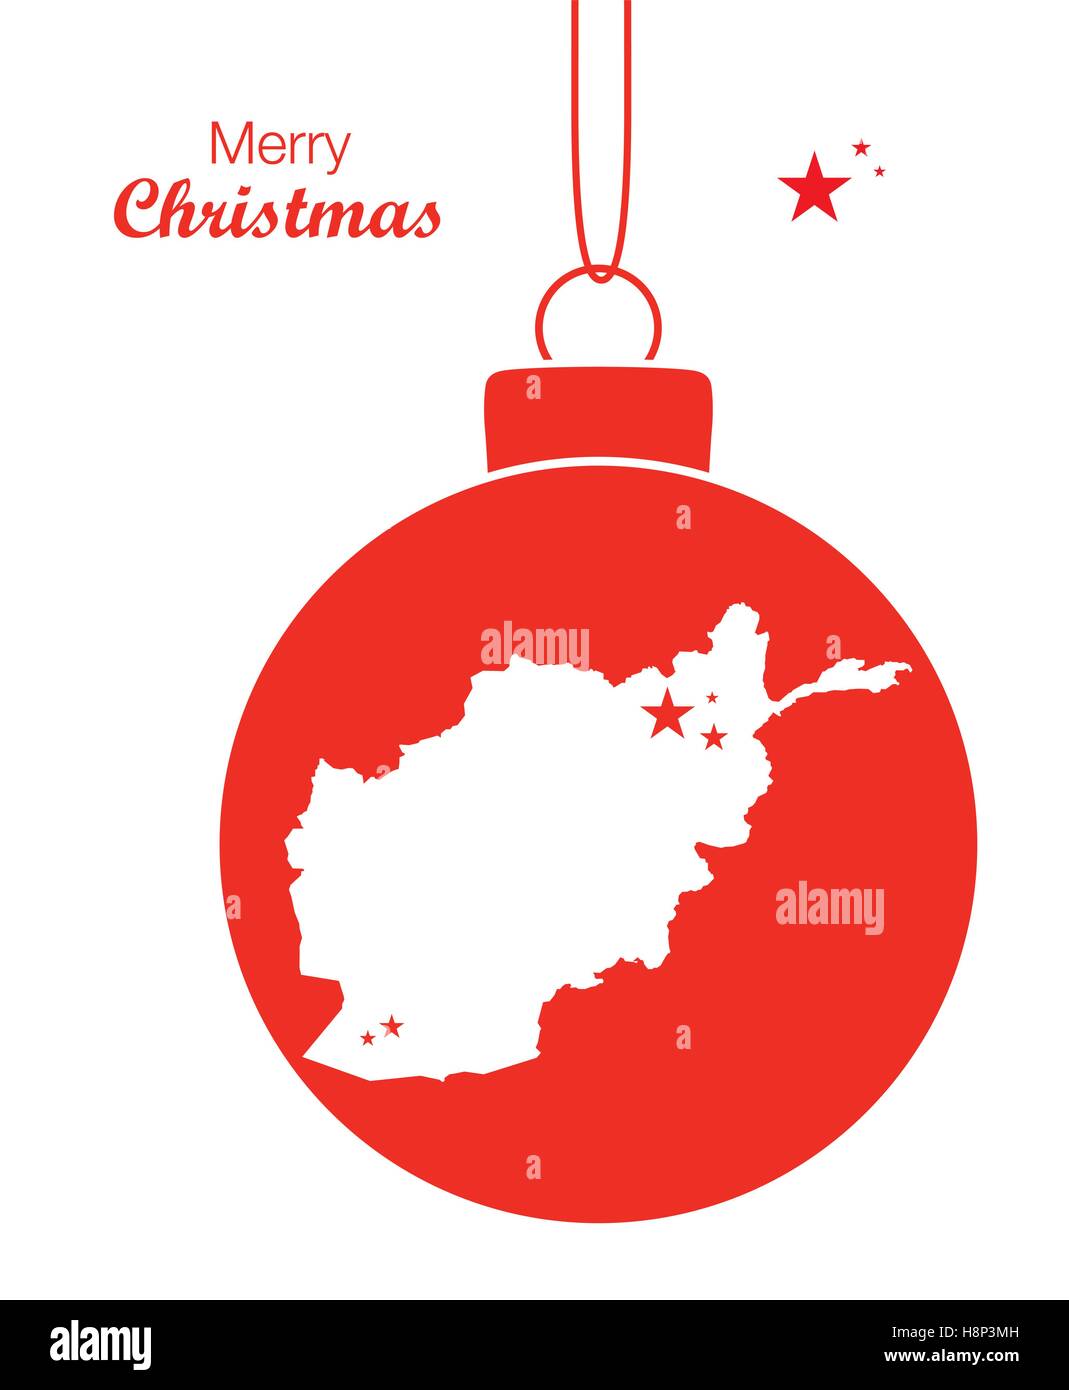 Merry Christmas illustration theme with map of Afghanistan Stock Vector